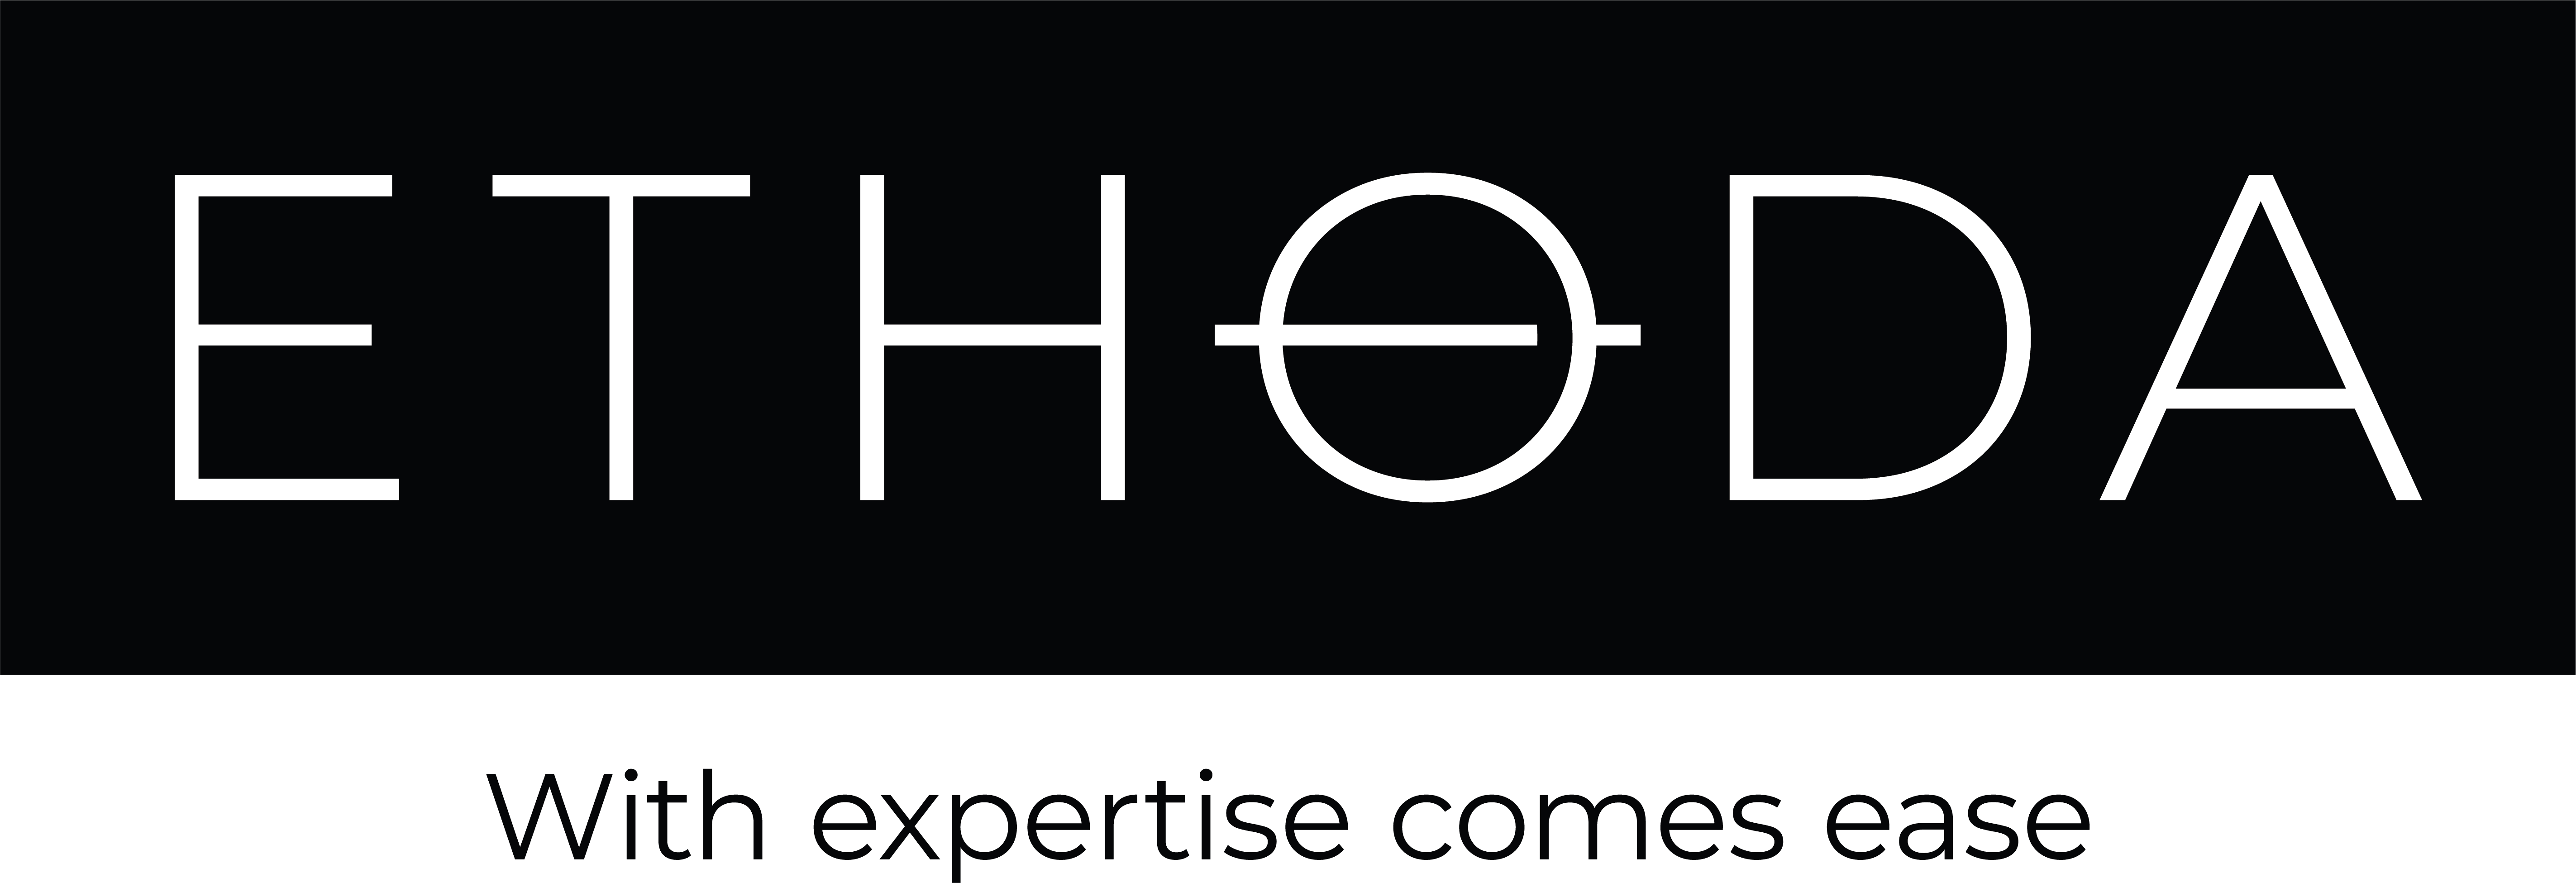 Ethoda Brand: With Expertise Comes Ease